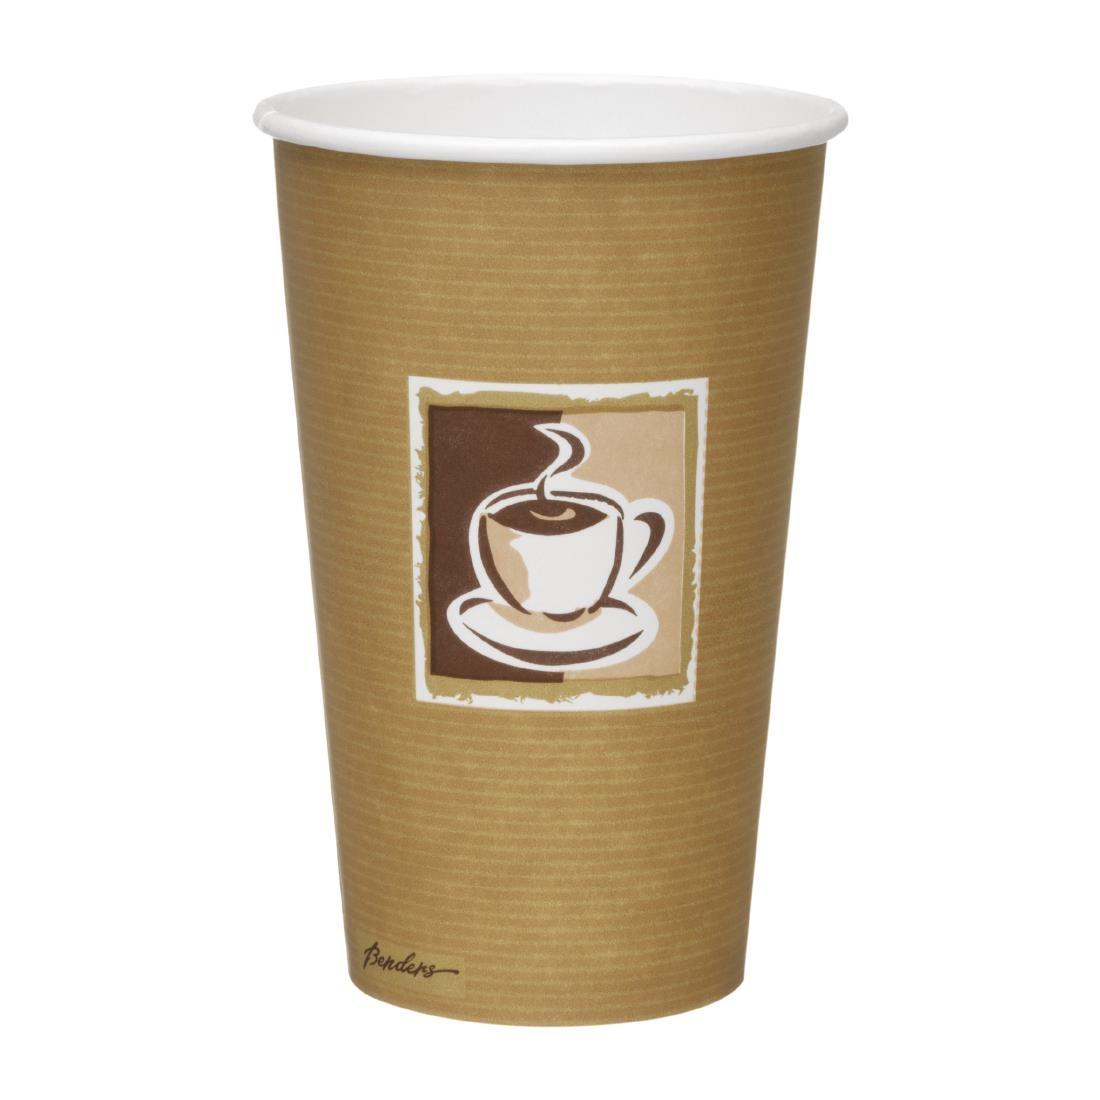 Benders Caffe Disposable Hot Cups 455ml / 16oz (Pack of 1000)